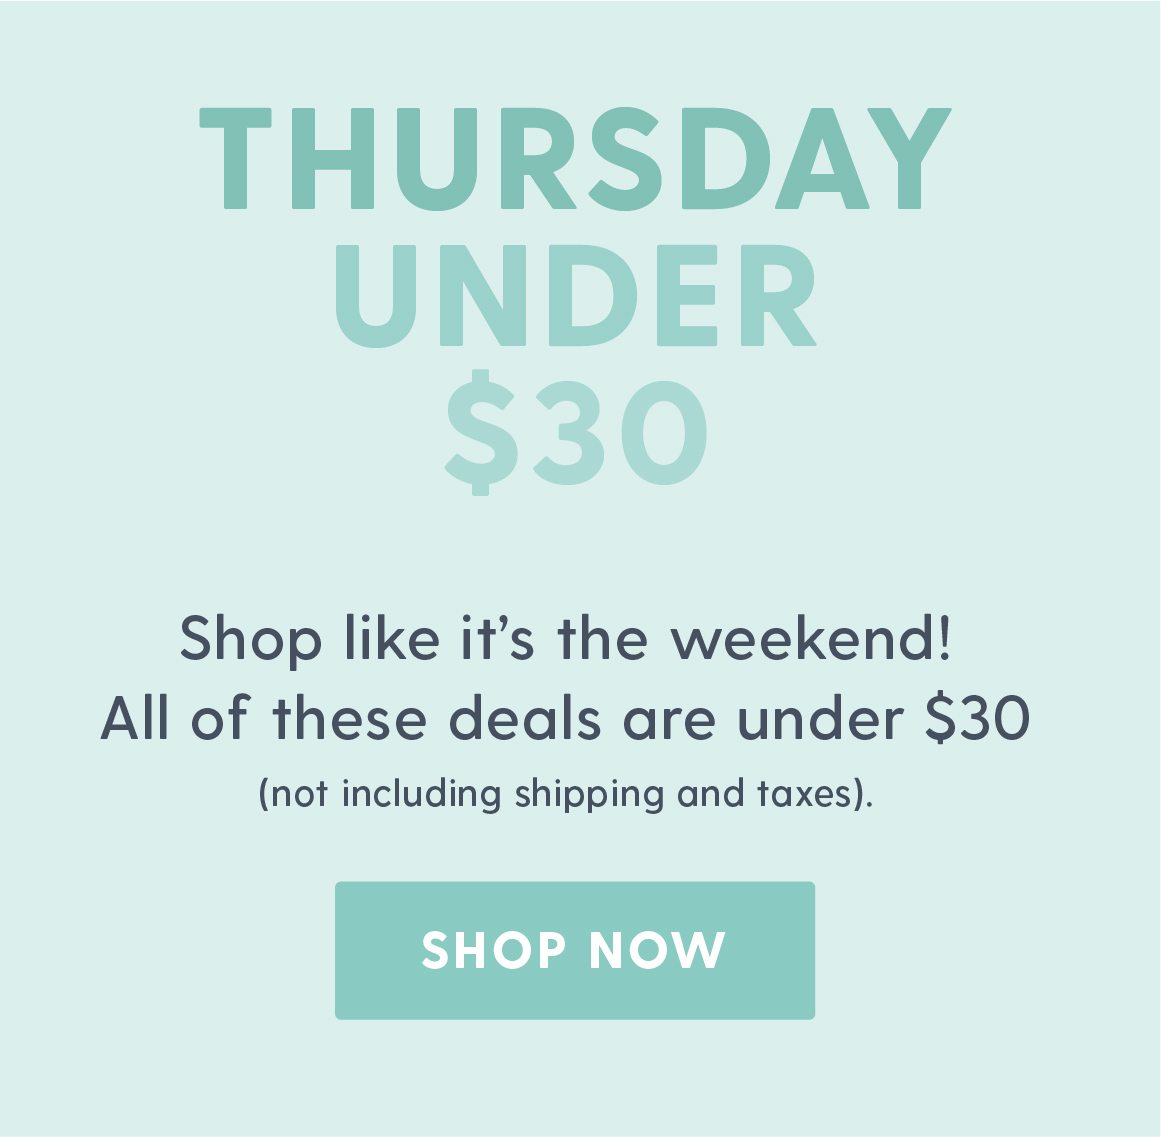 Thursday Under $30. Shop like it's the weekend! All of these deals are under $30 (not including shipping and taxes). Shop Now.